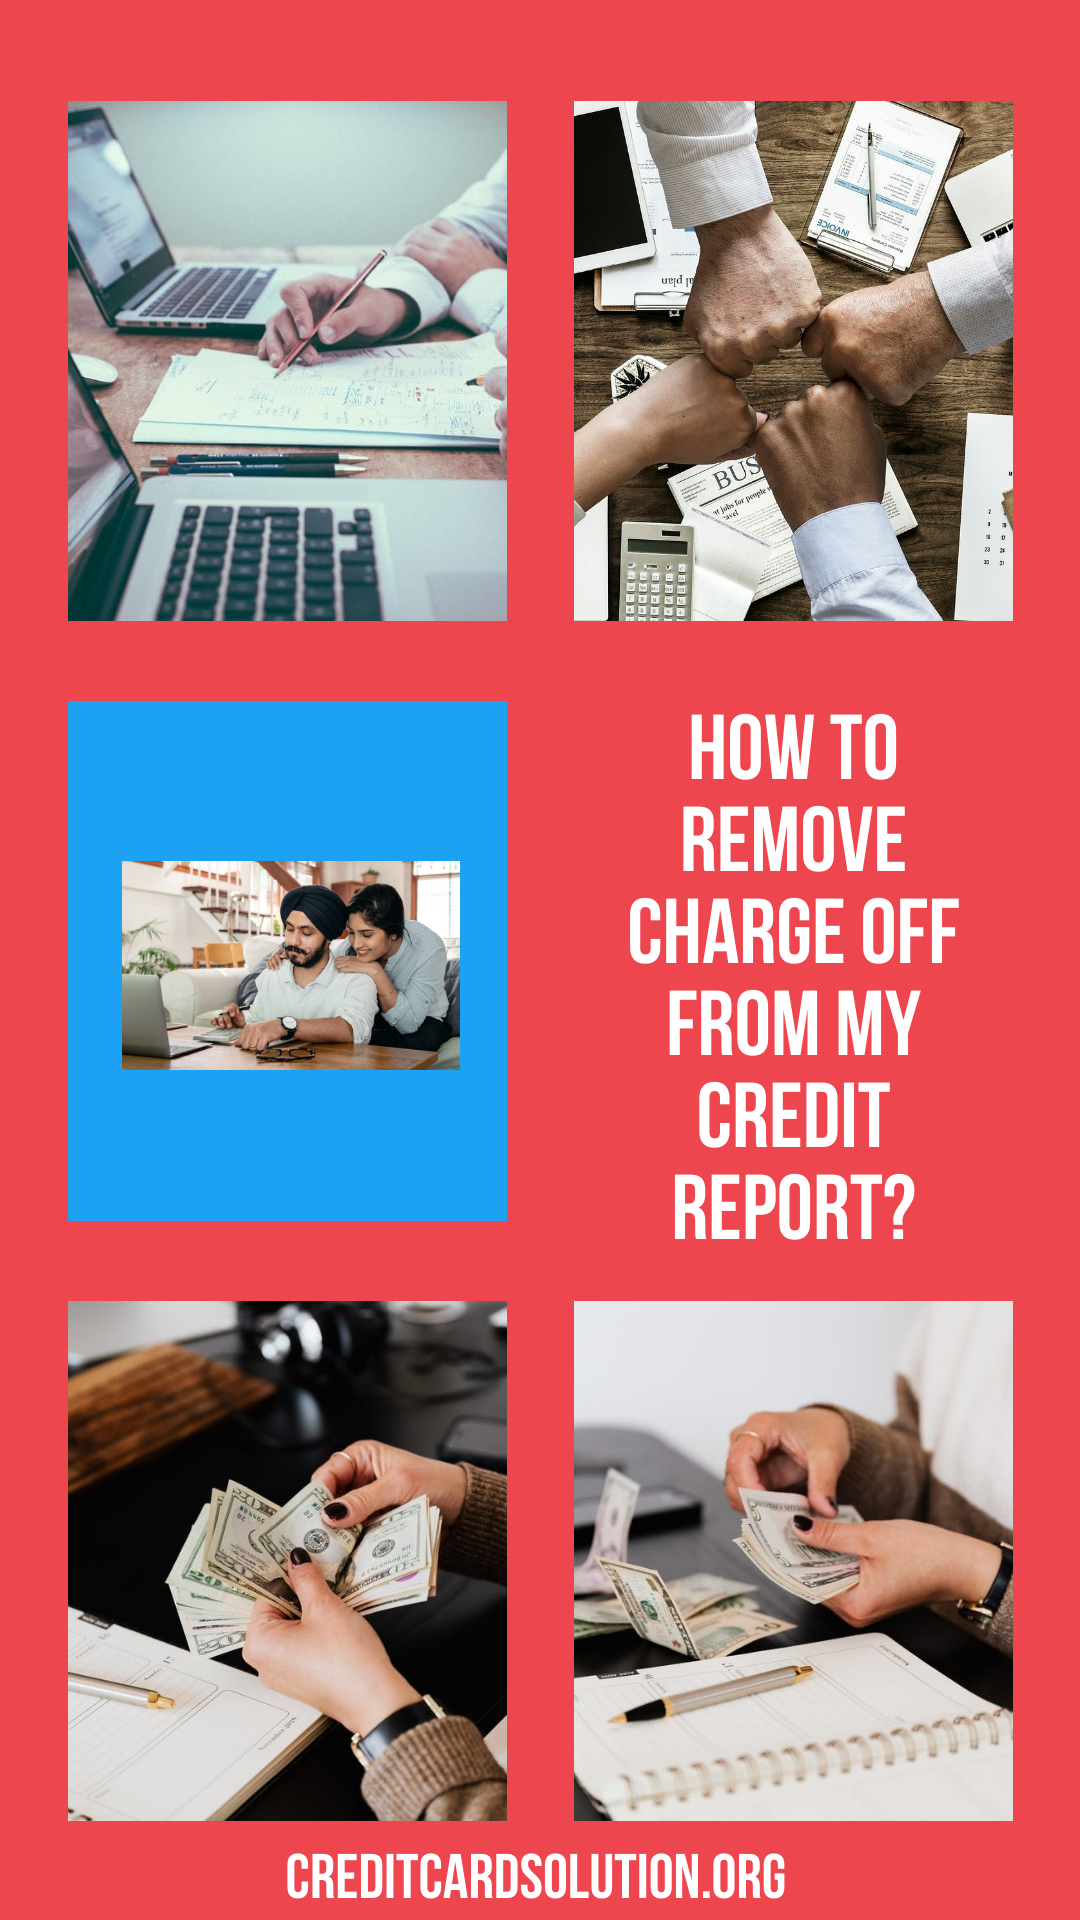 How To Remove Charge Off From My Credit Report?